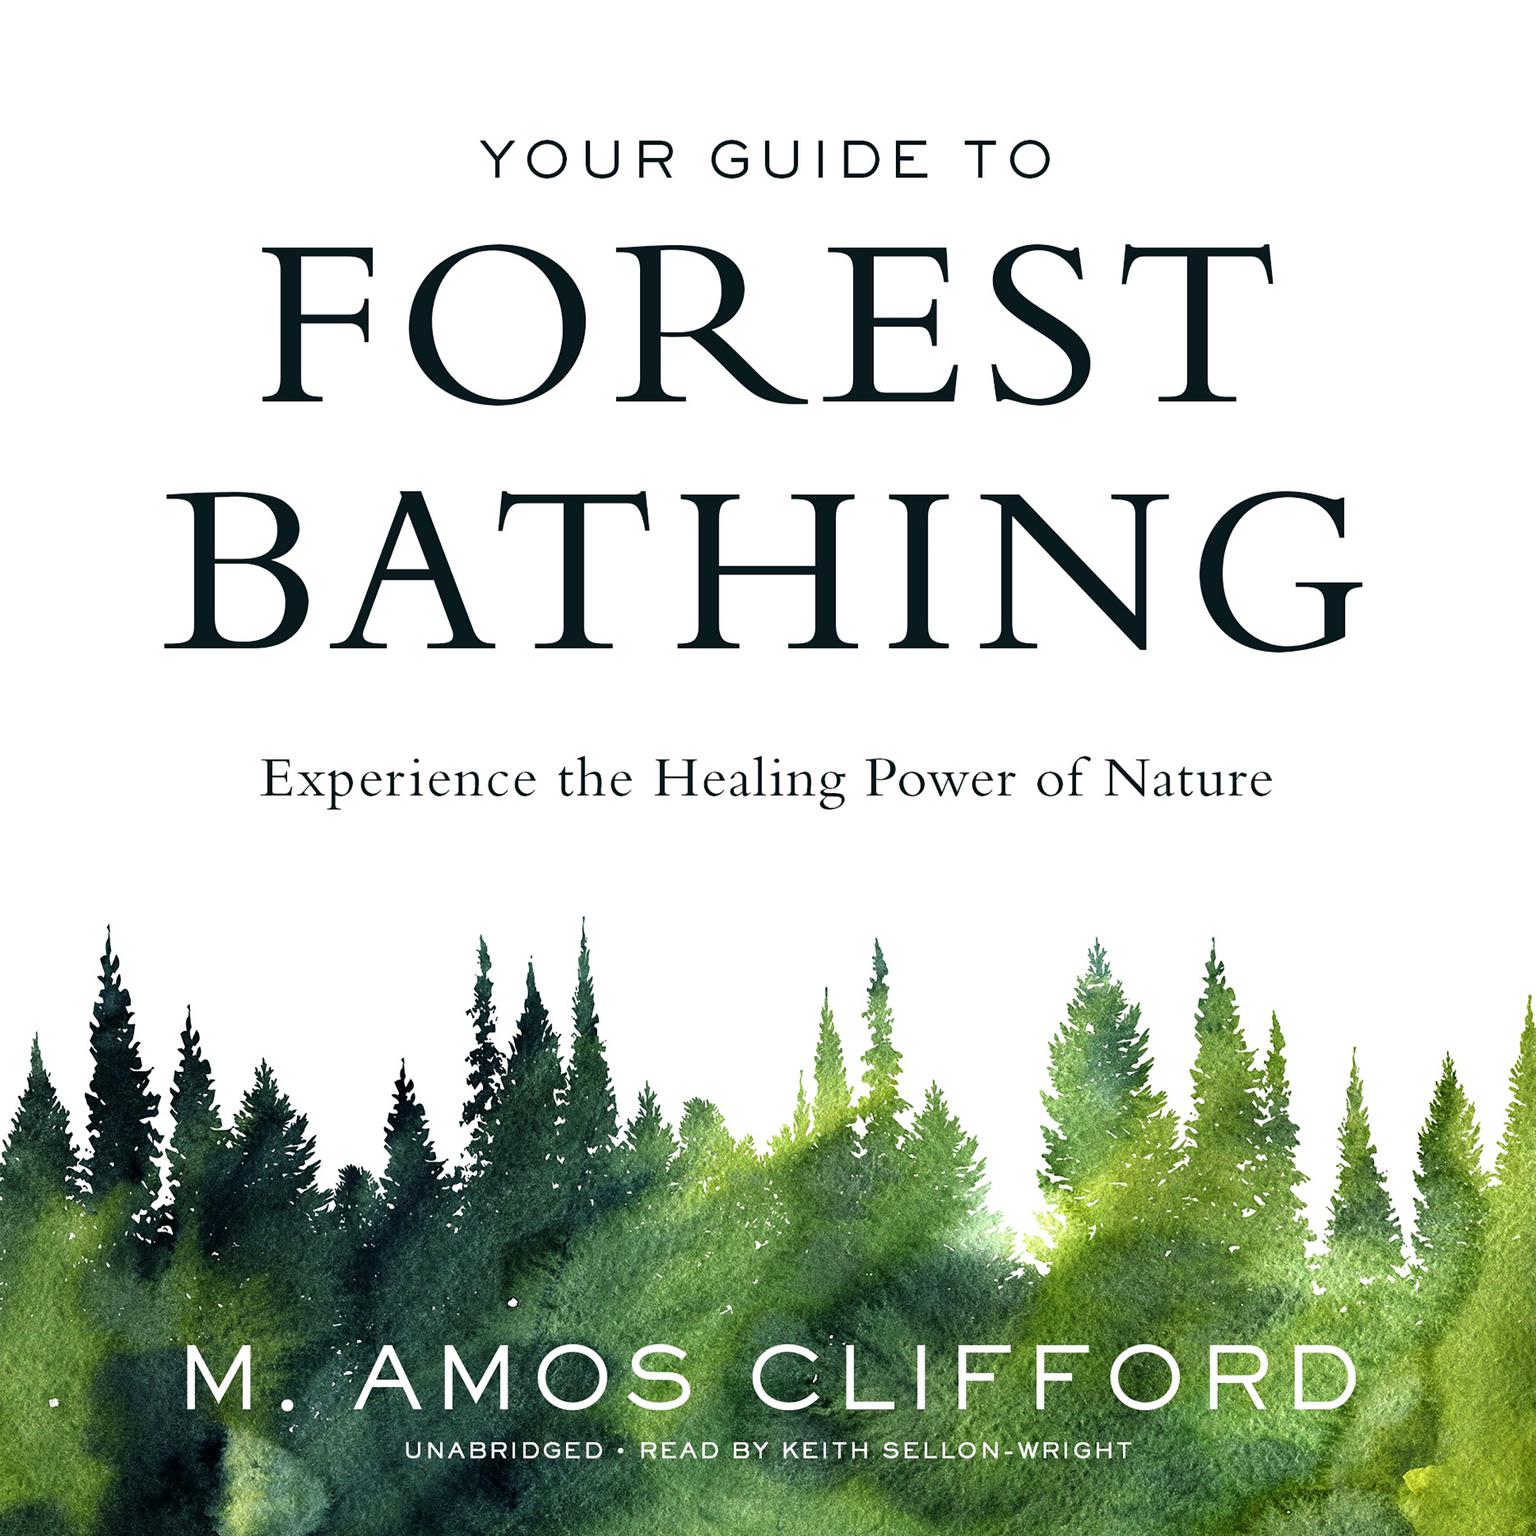 Your Guide to Forest Bathing: Experience the Healing Power of Nature Audiobook, by M. Amos Clifford